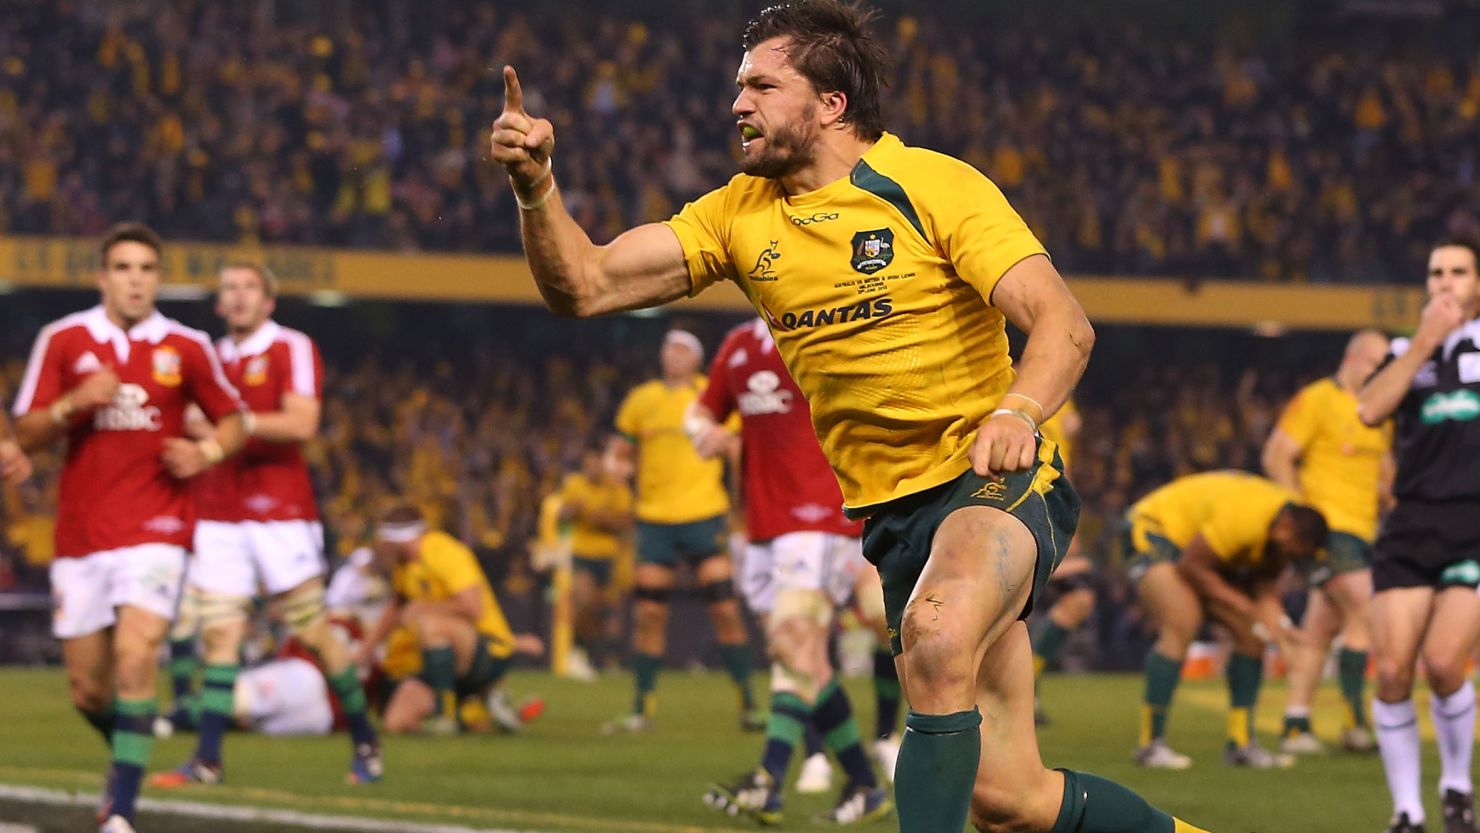 Adam Ashley Cooper celebrates his game winning try for the Wallabies as they beat the British and Irish Lions 16-15.